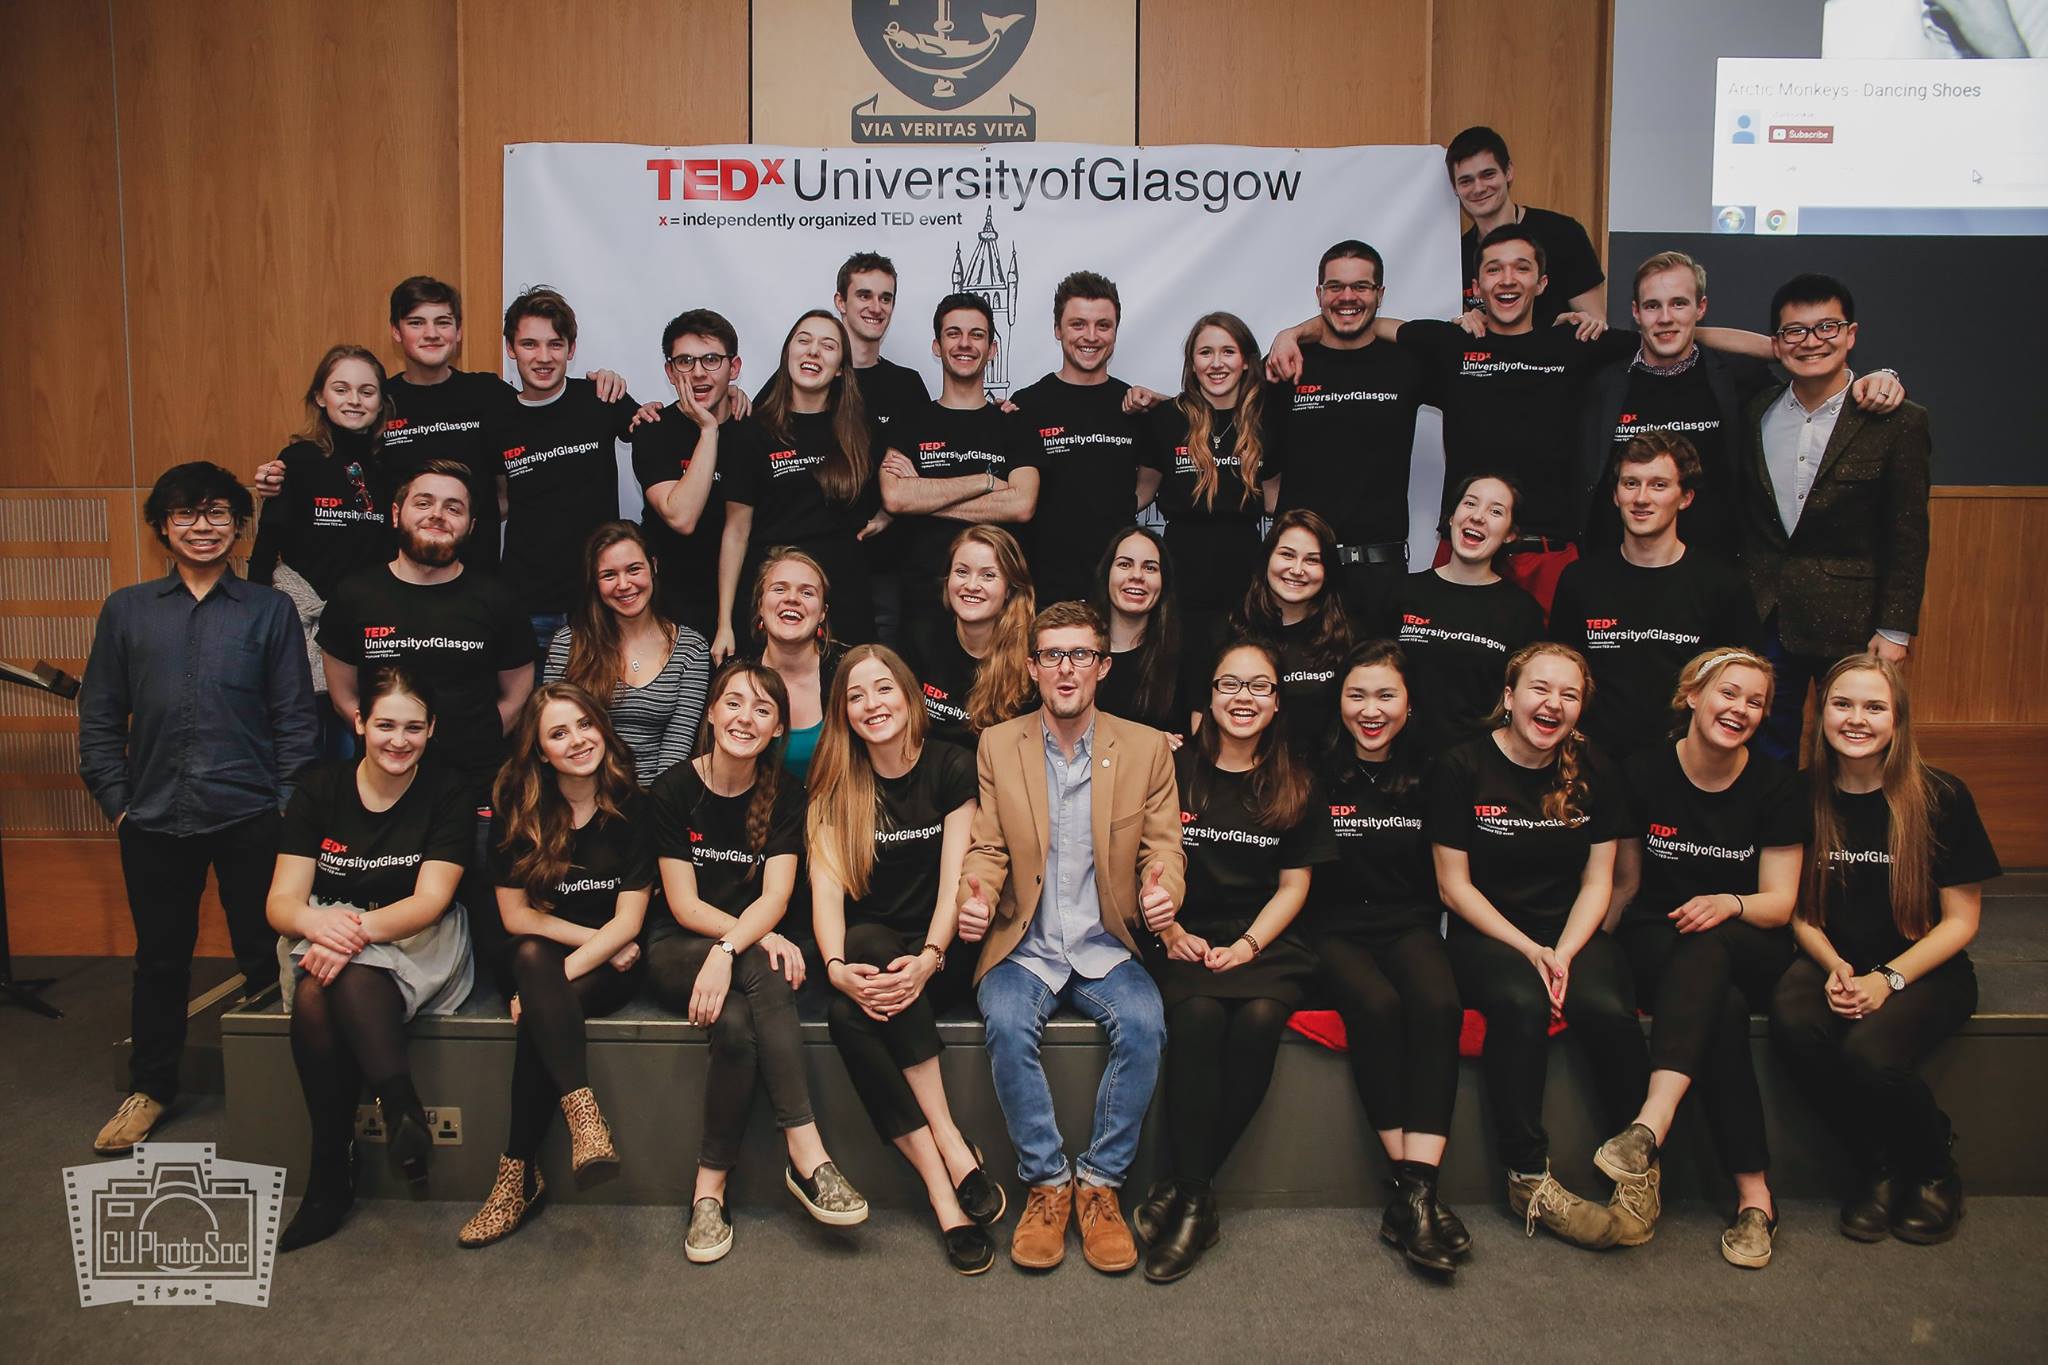 The TedX UofG 2016 team along with Miles Timis. Image credits: GUPhotoSOC